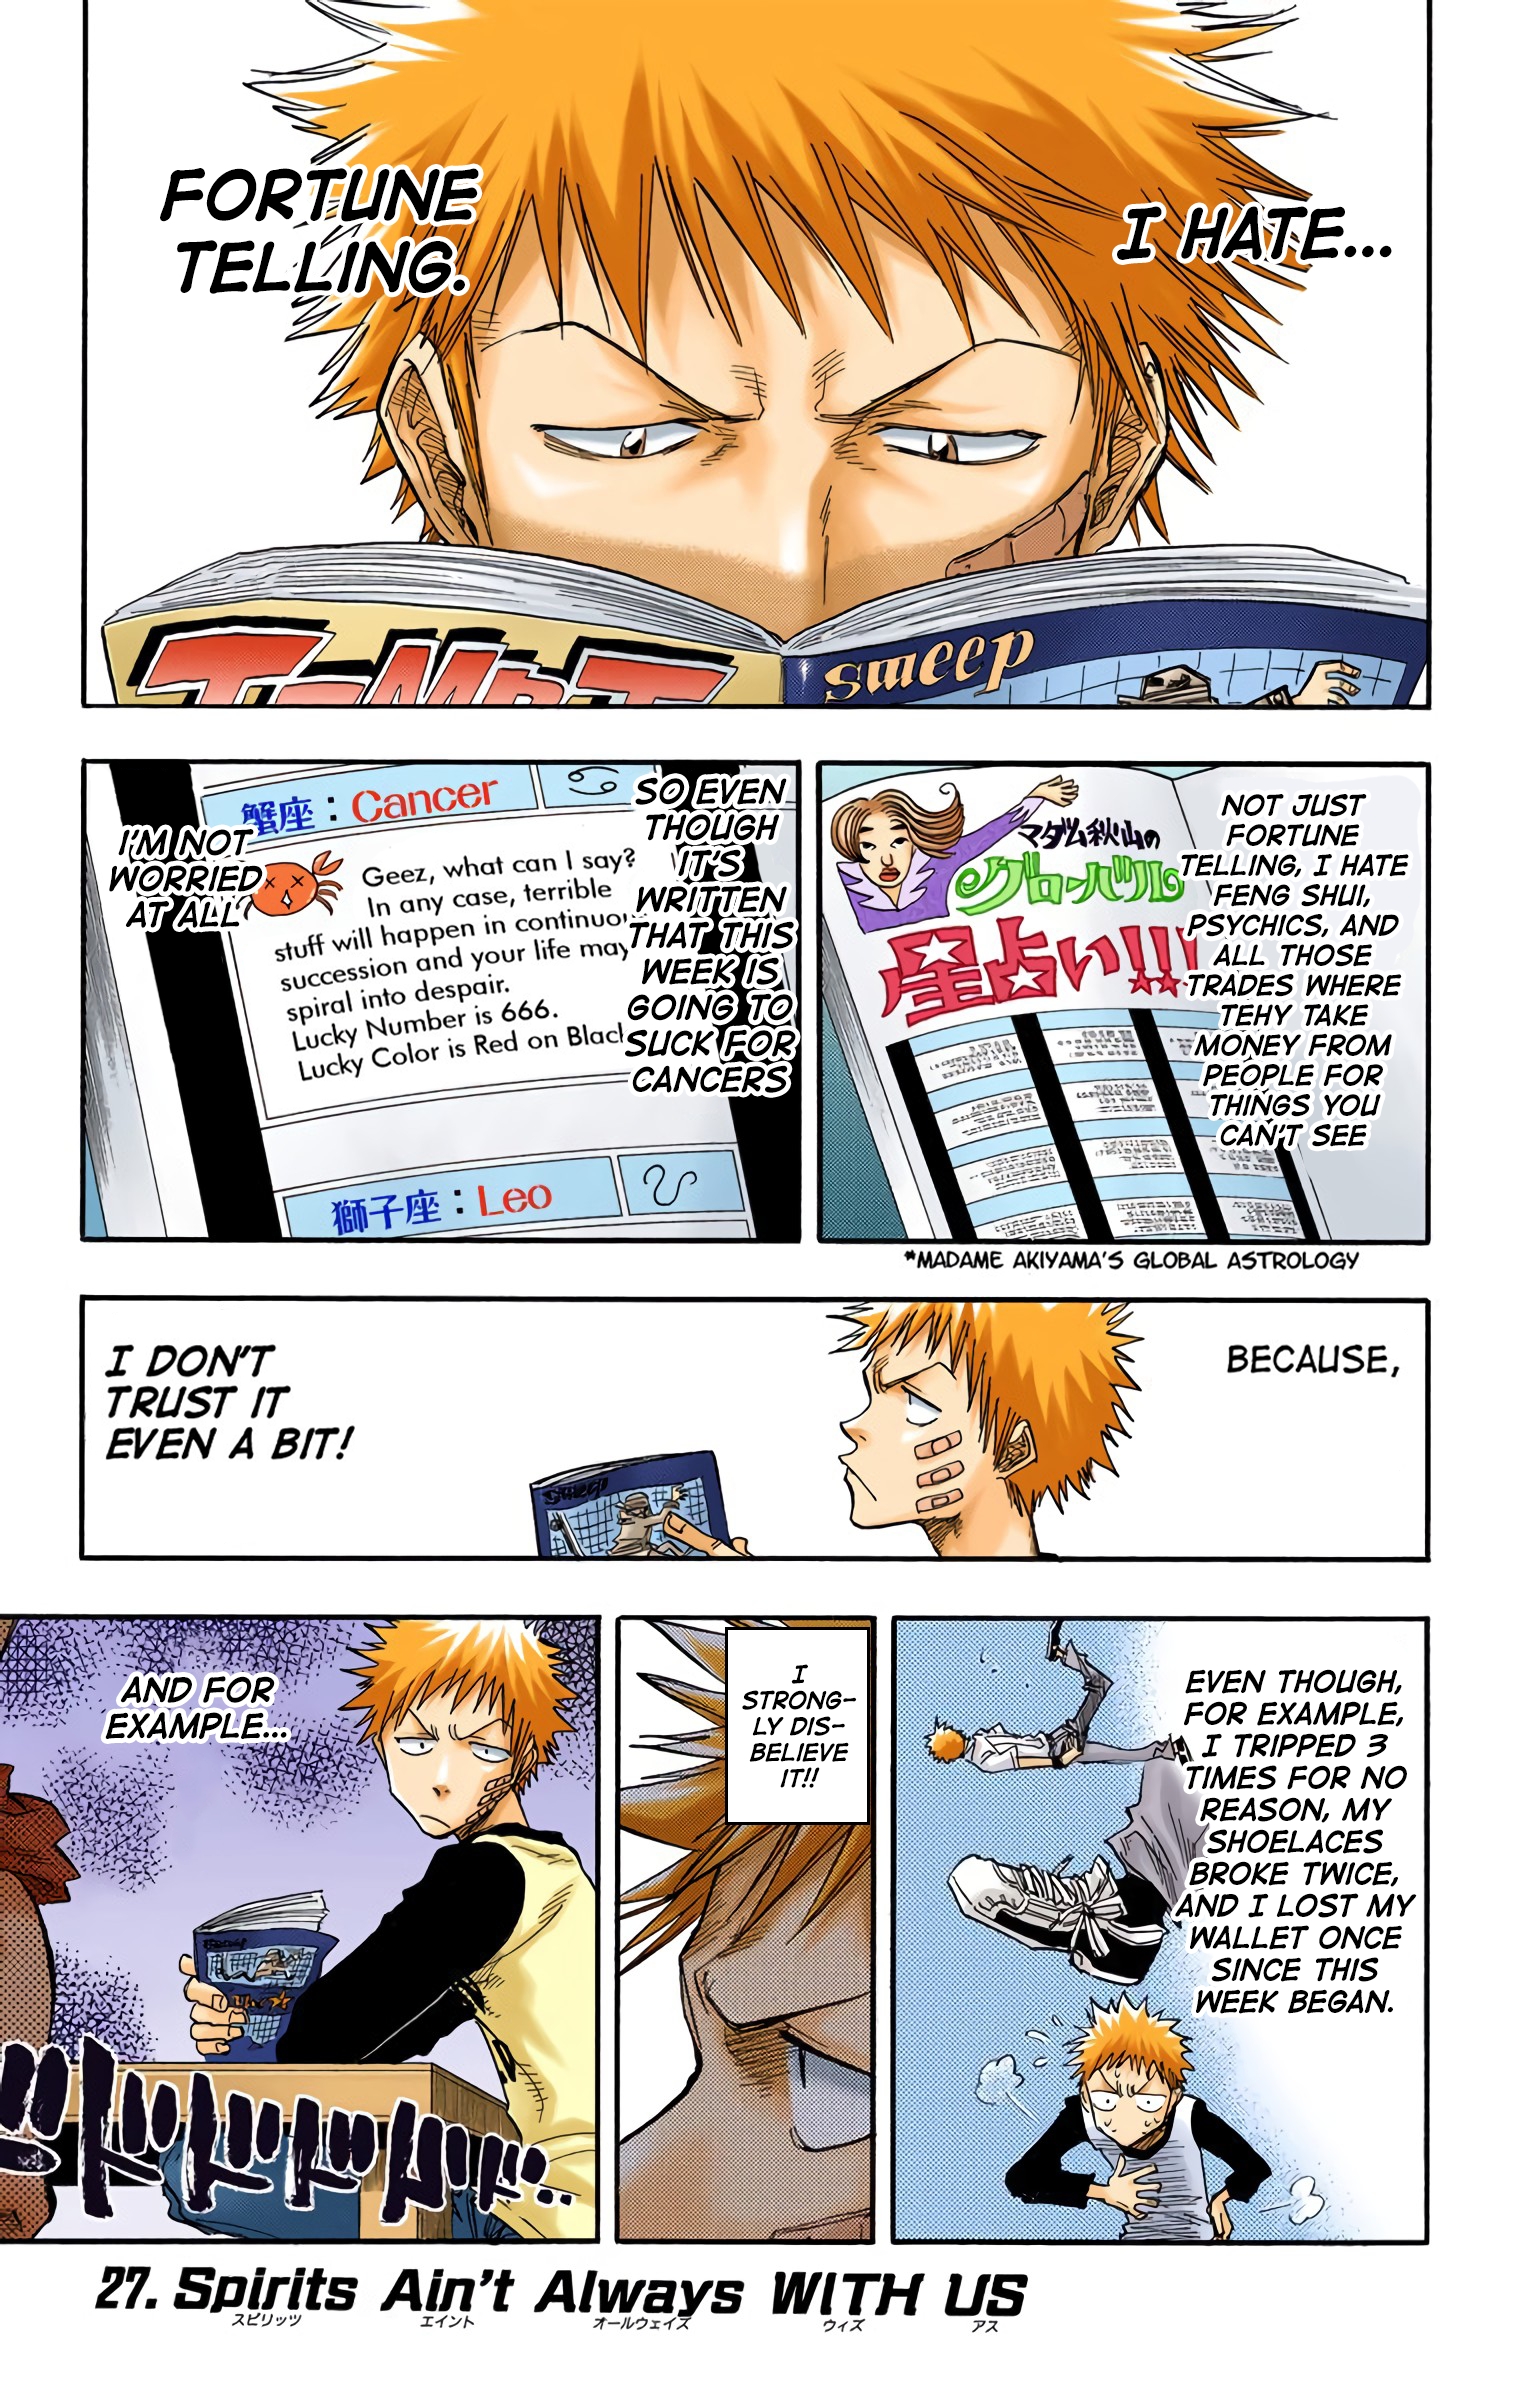 Bleach - Digital Colored Comics Vol.4 Chapter 27: Spirits Aren't Always With Us - Picture 1